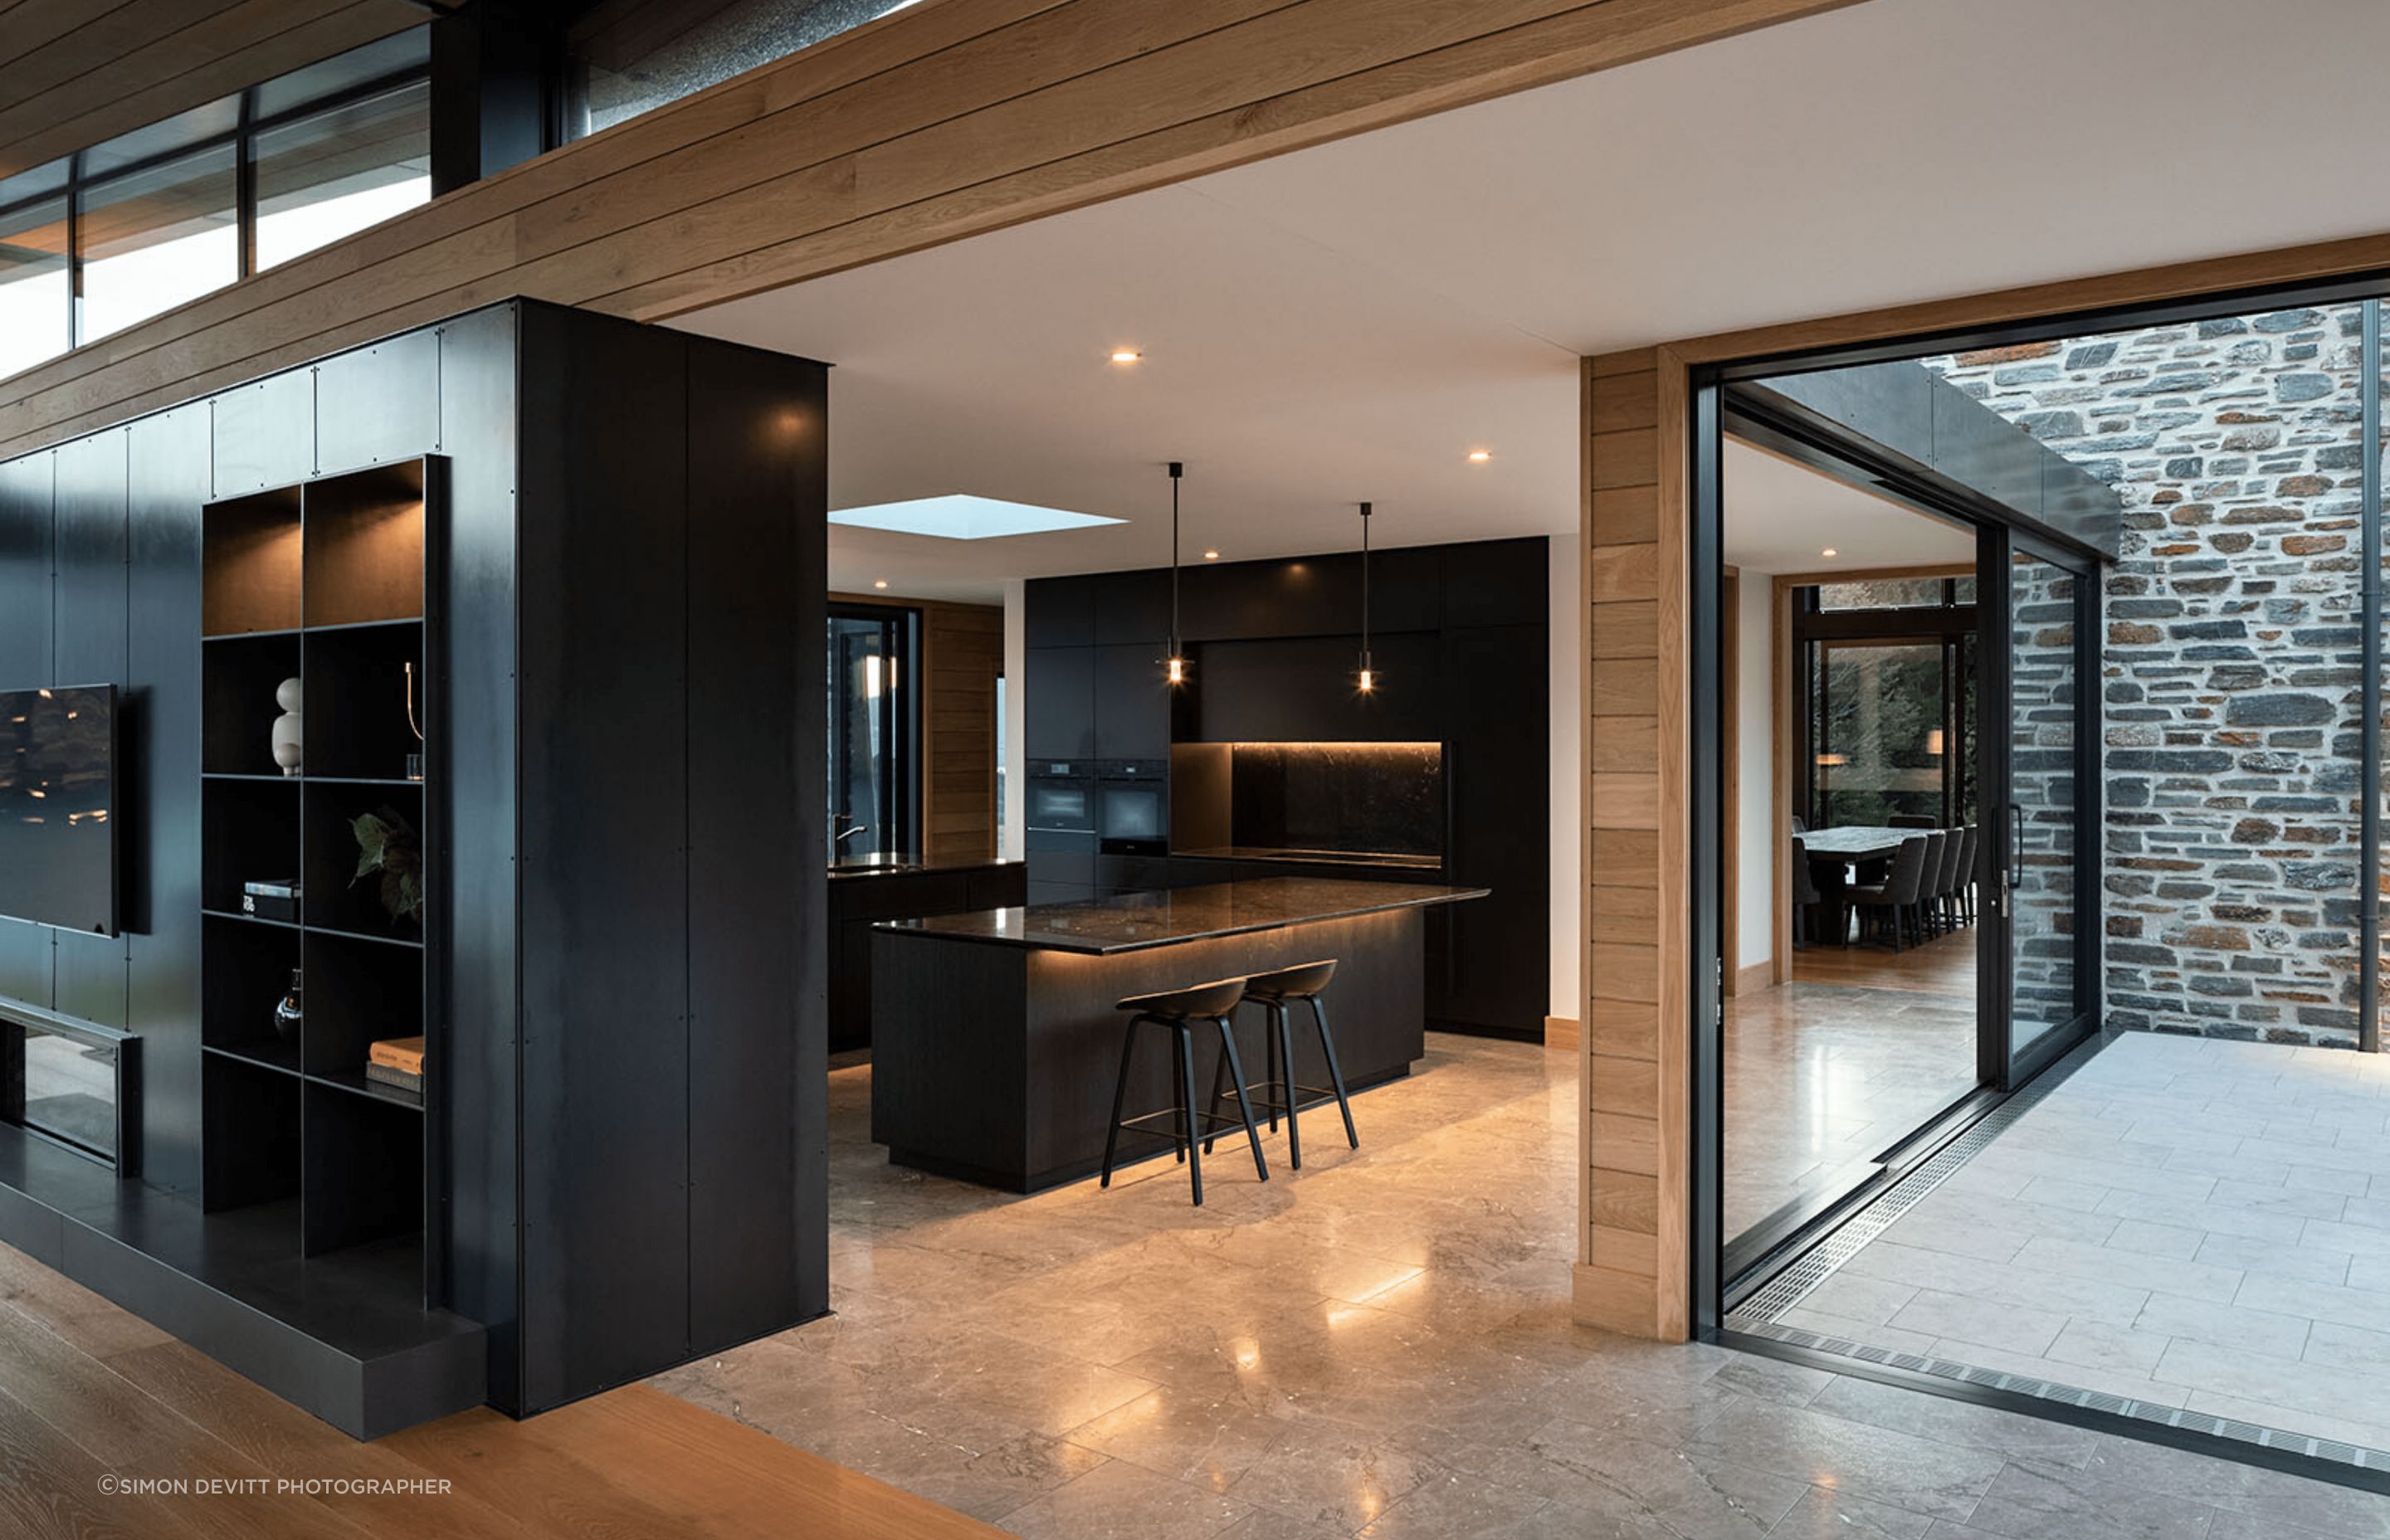 The dark and recessive kitchen means the focus stays on the views and architecture.